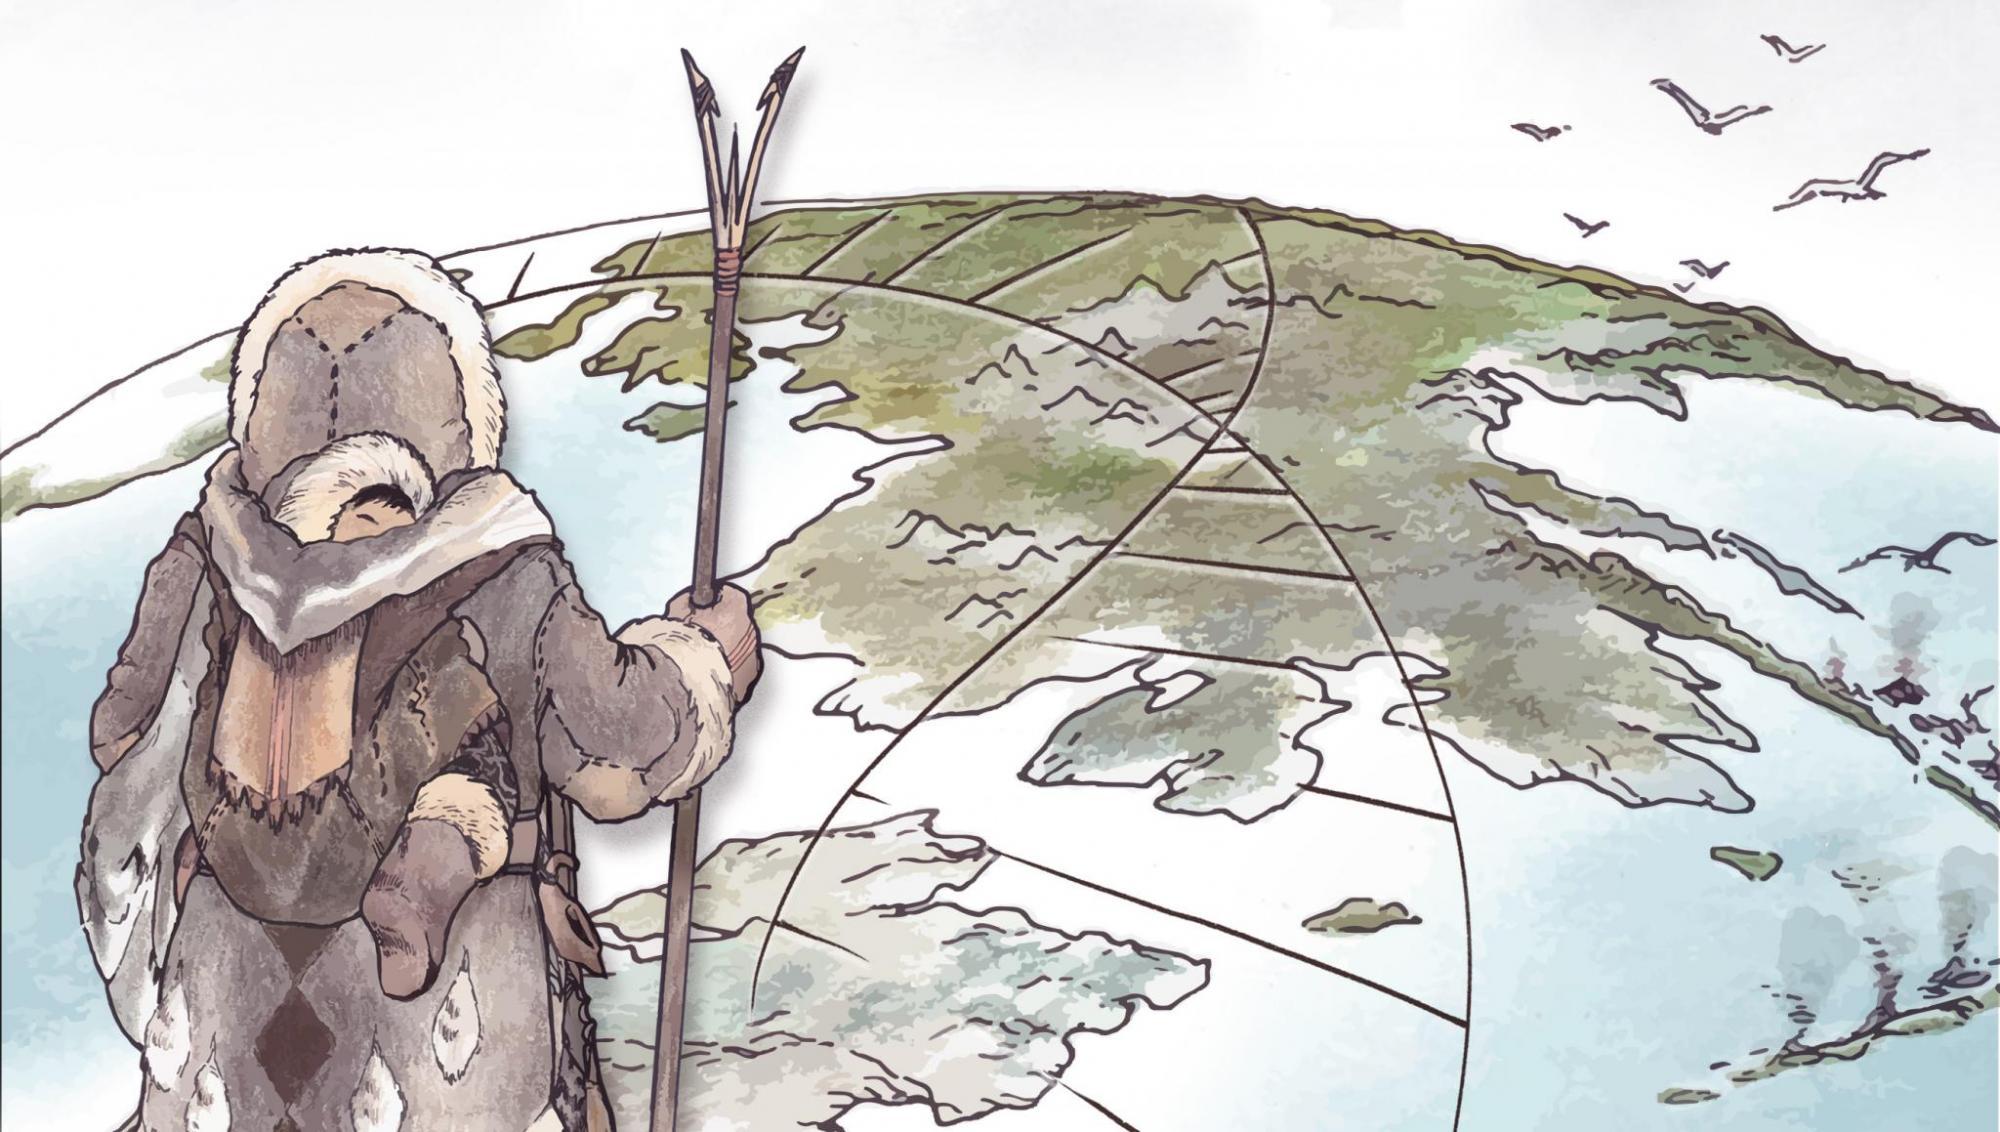 Descendants of the Ancient Paleo-Siberians migrated into the Americas between 6,000 and 10,000 years ago (Illustration by Kerttu Majander, Design by Michelle O&amp;#039;Reilly)